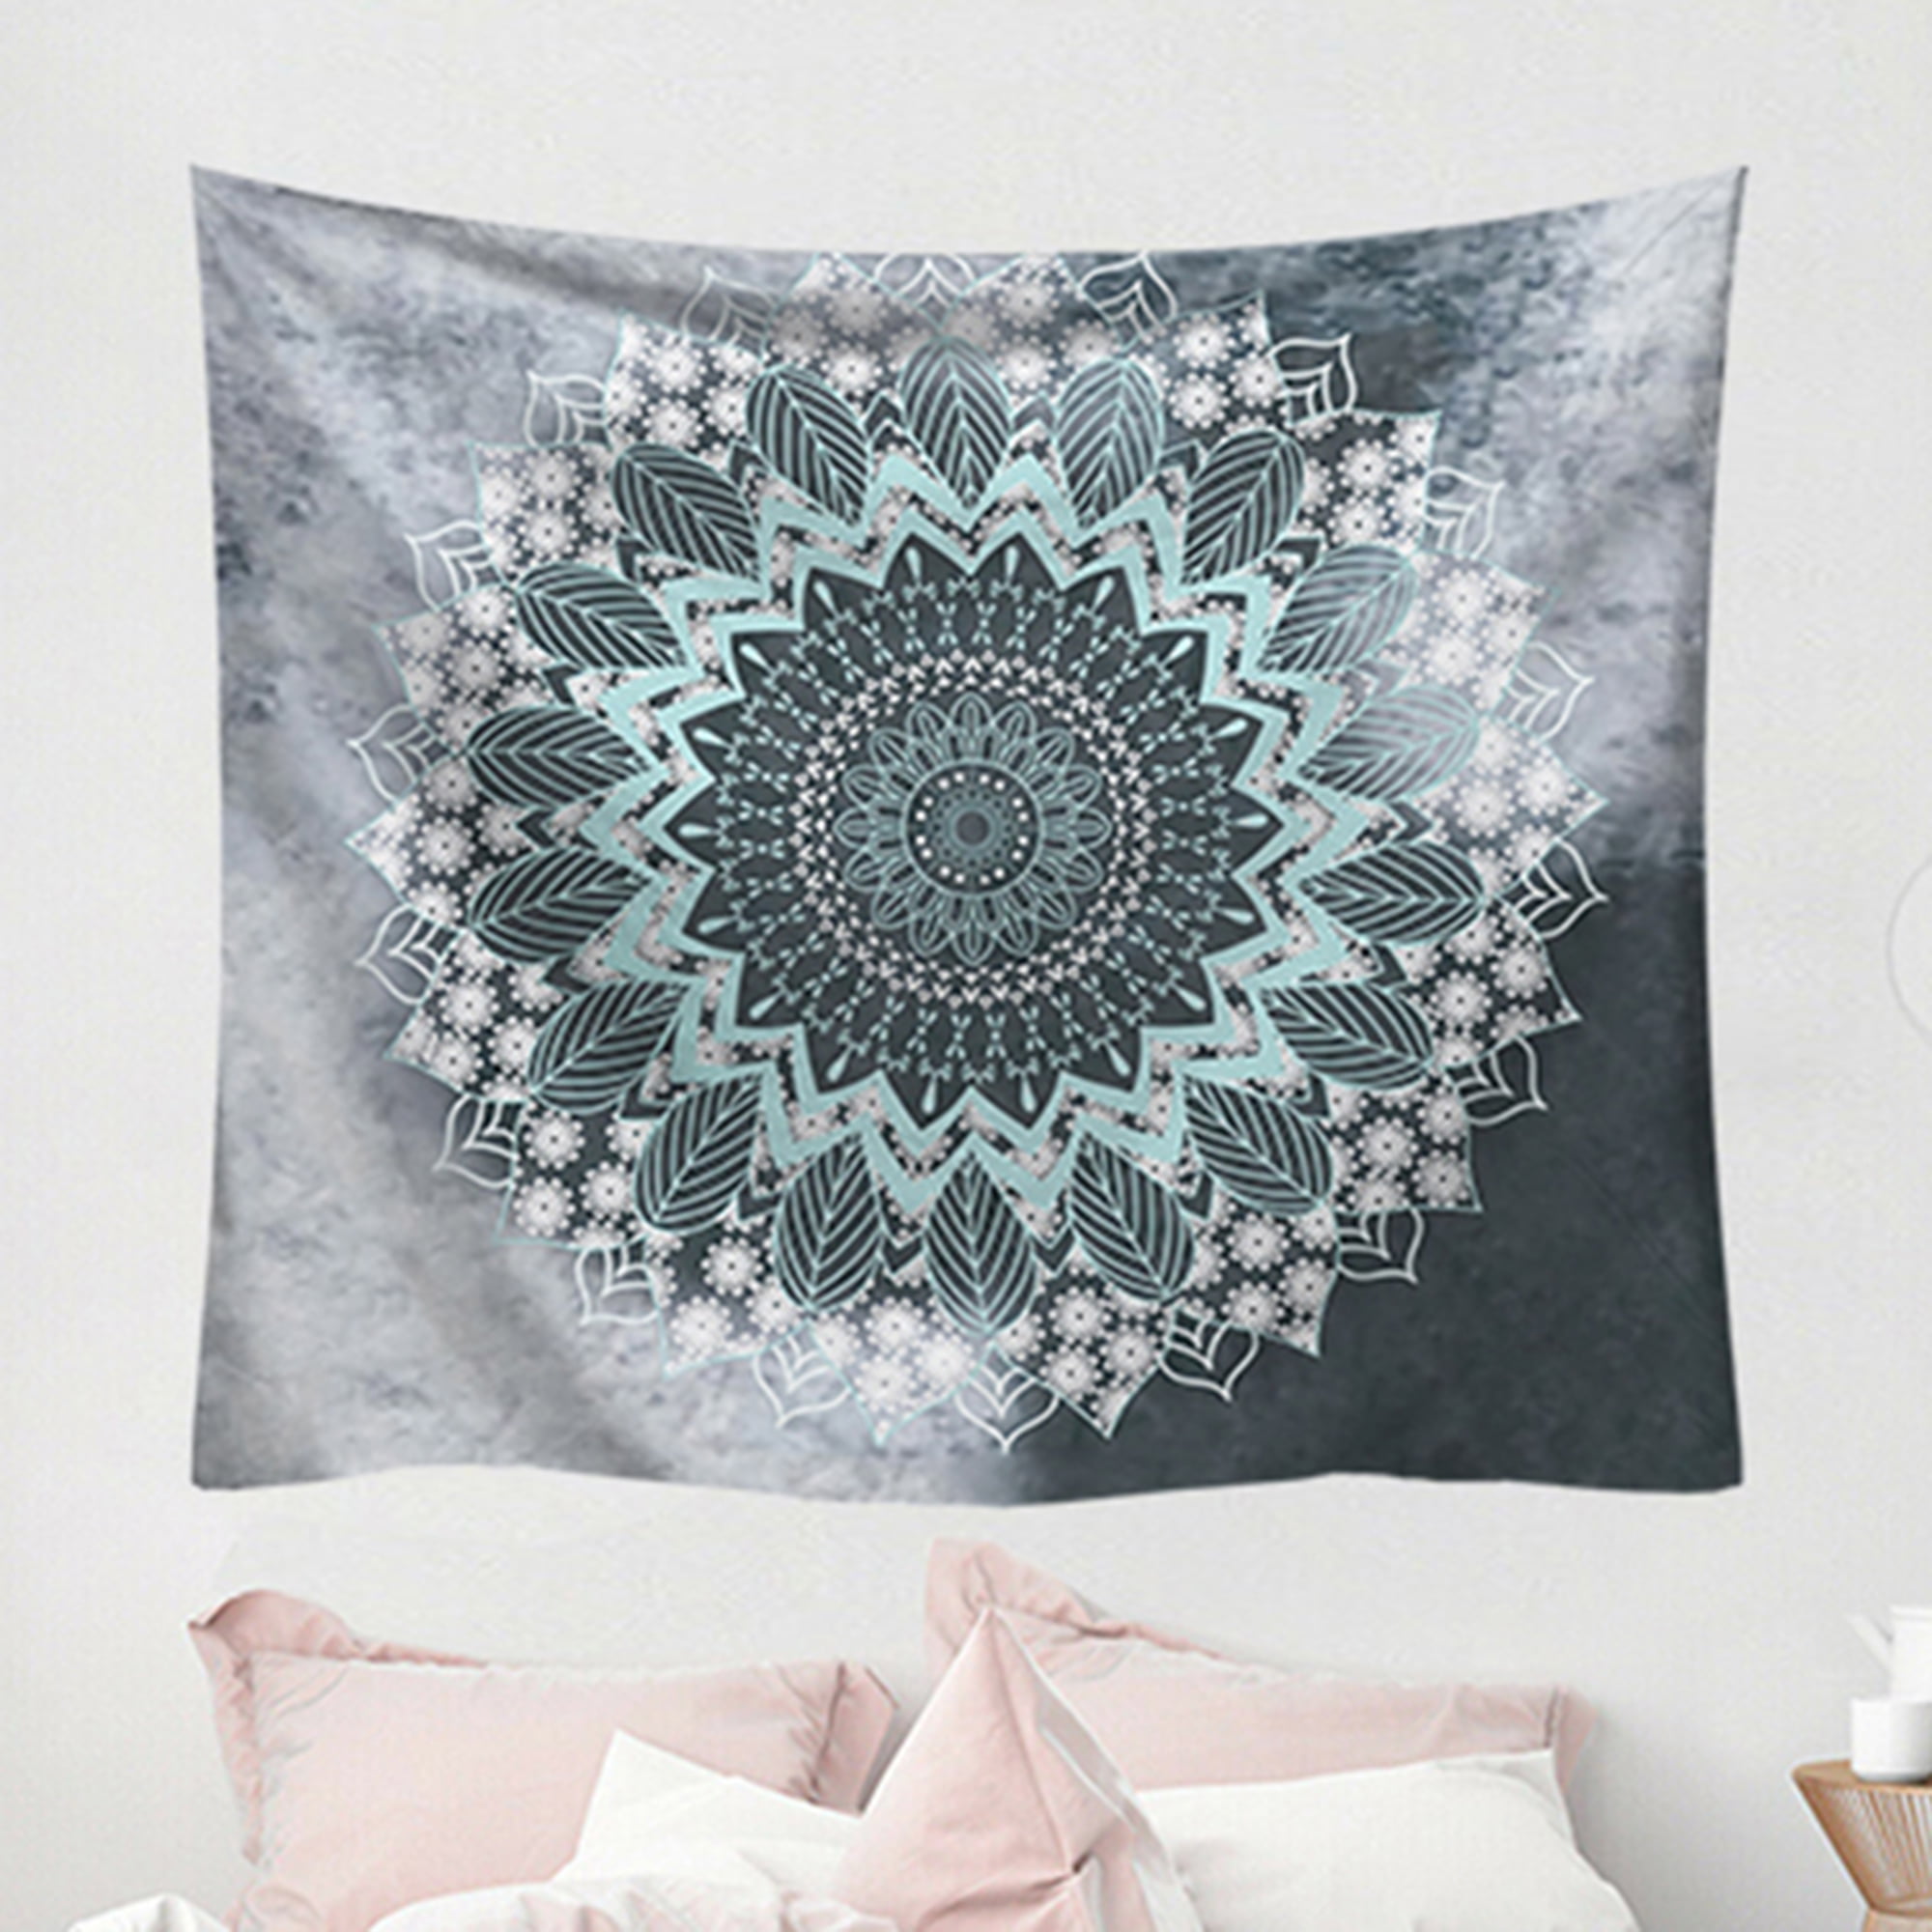 Mandala Hippie Tapestry Wall Hanging Psychedelic Bedspread Throw Bohemian Cover 